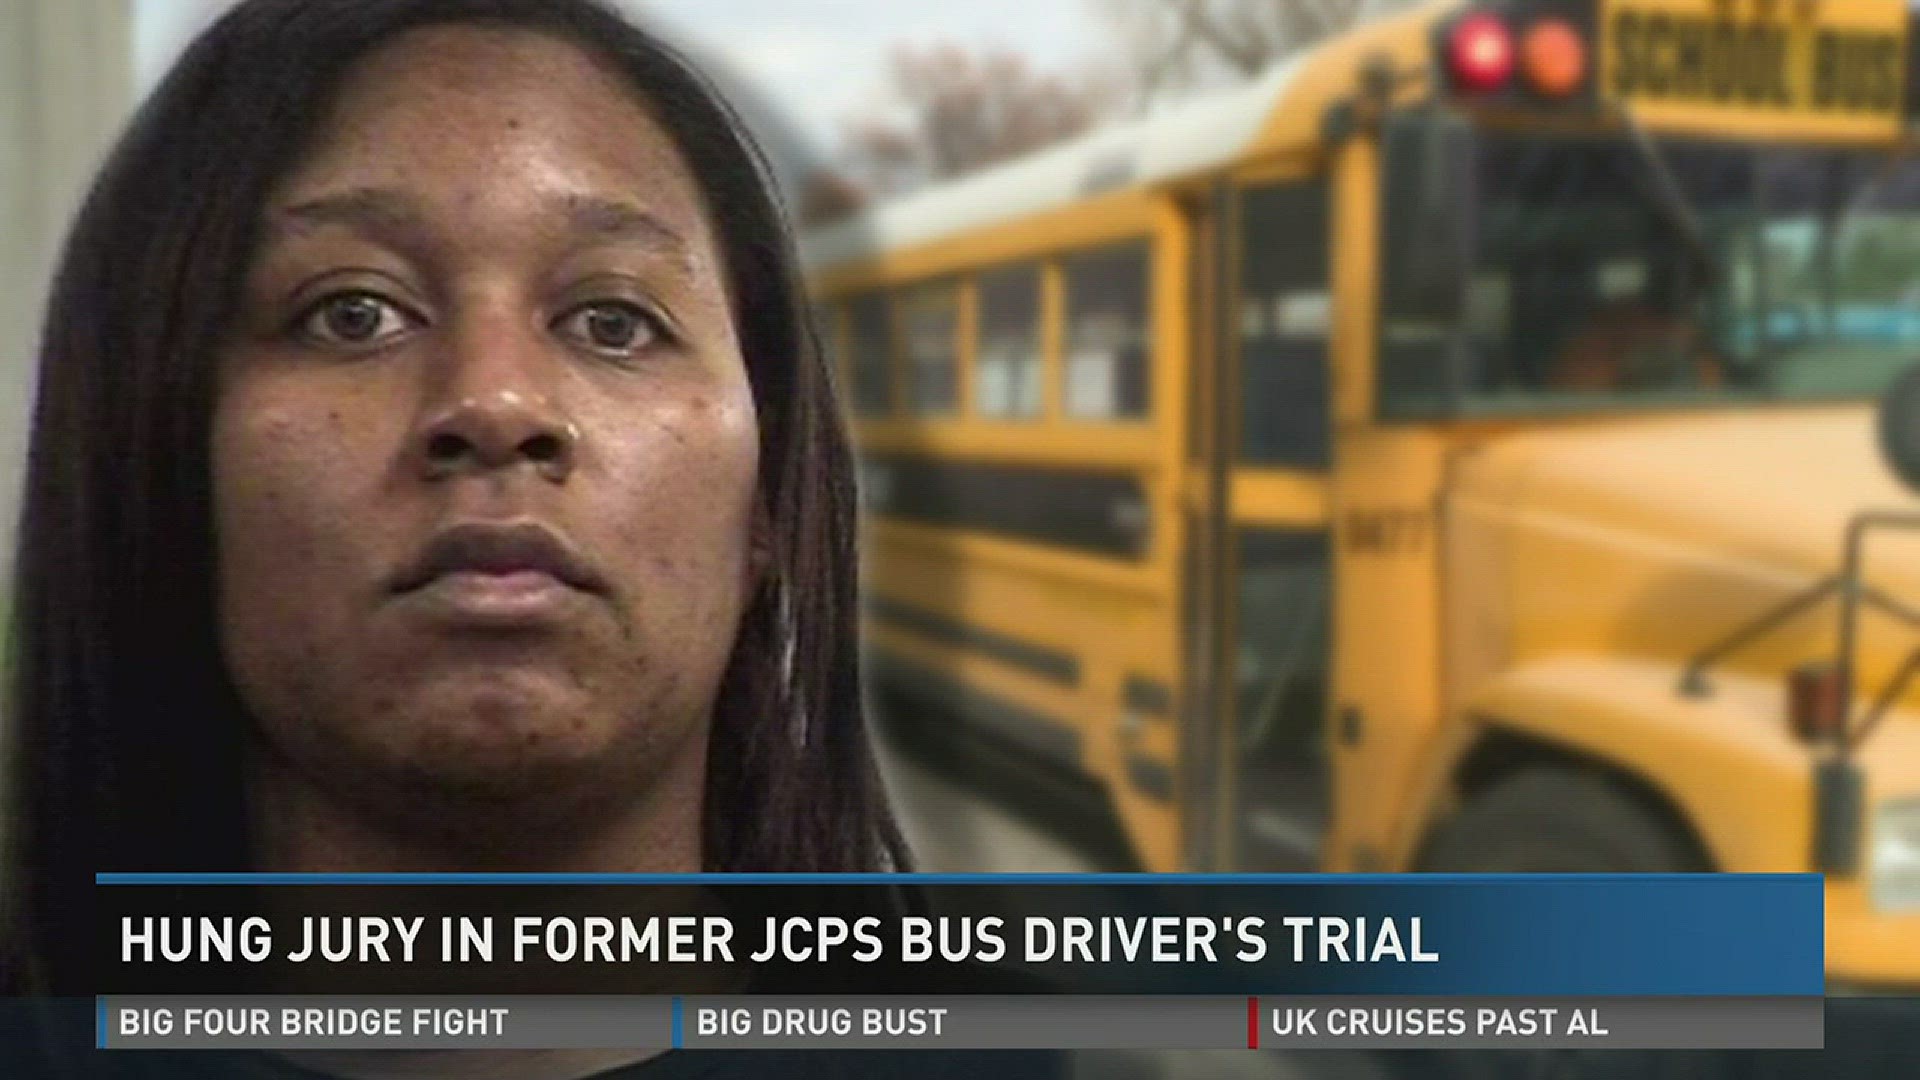 Hung jury in former JCPS bus driver's trial